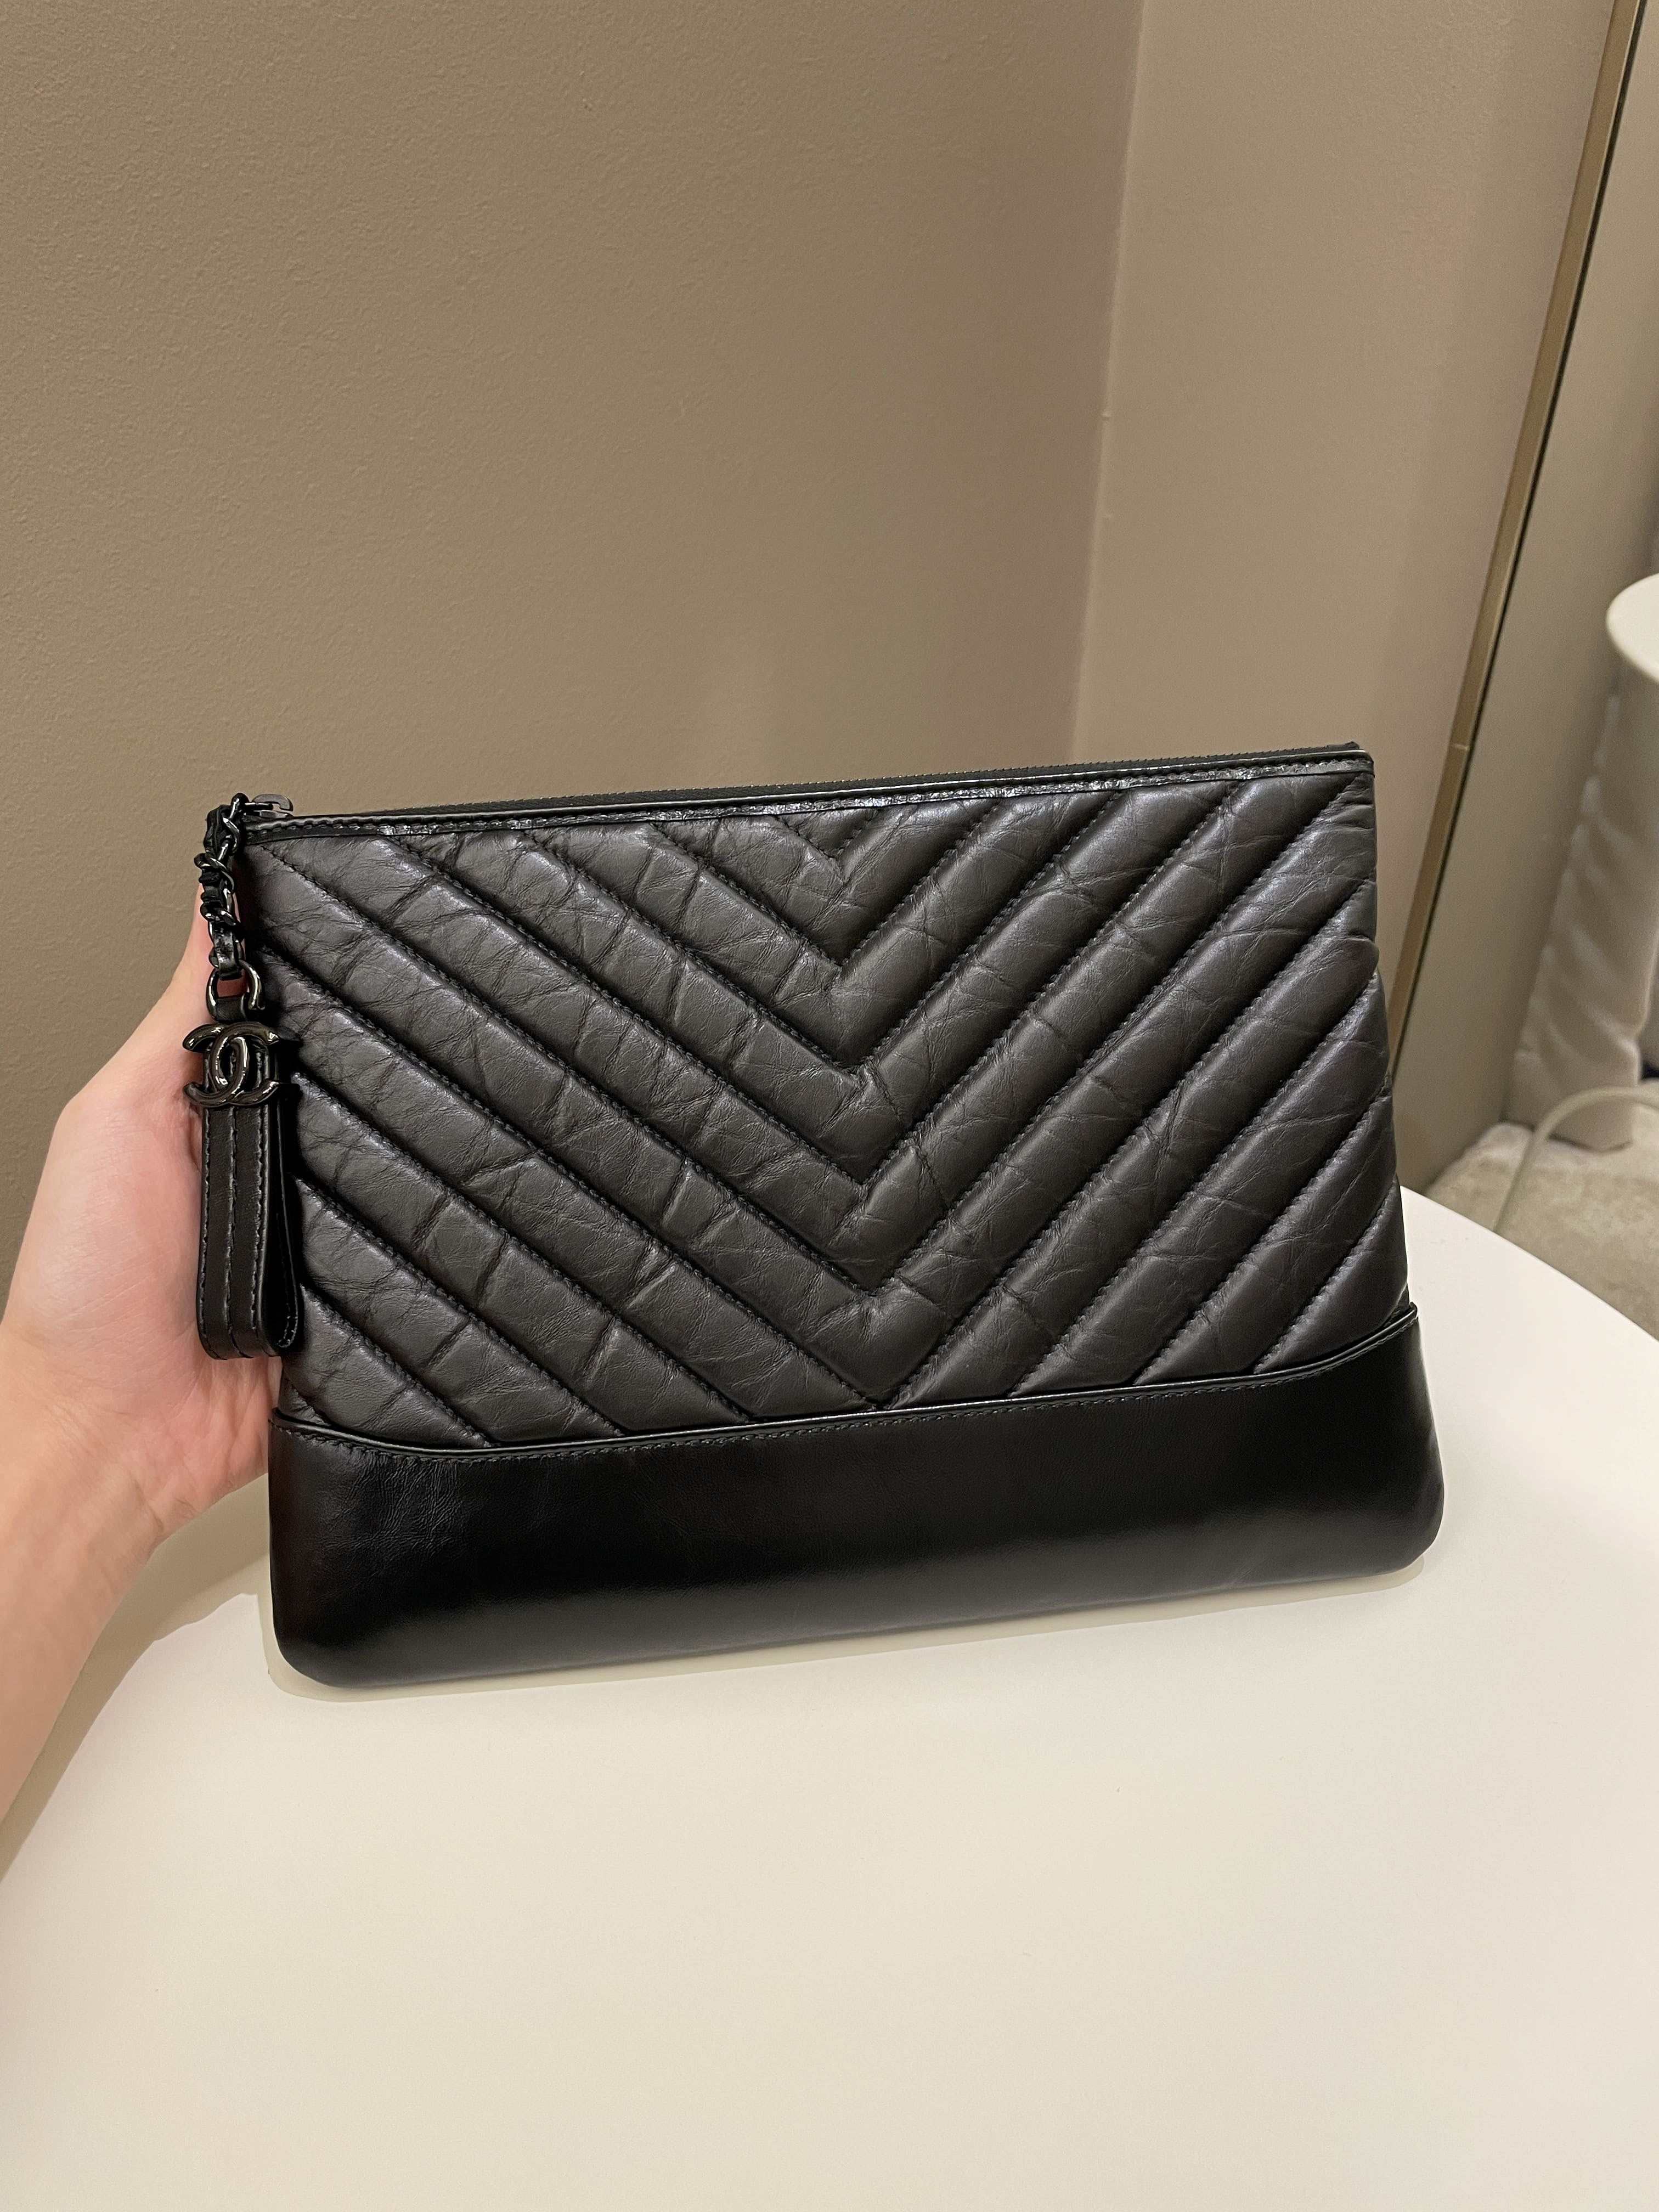 Chanel Gabrielle Small Hobo in Chevron Quilted Black Aged Calfskin - SOLD